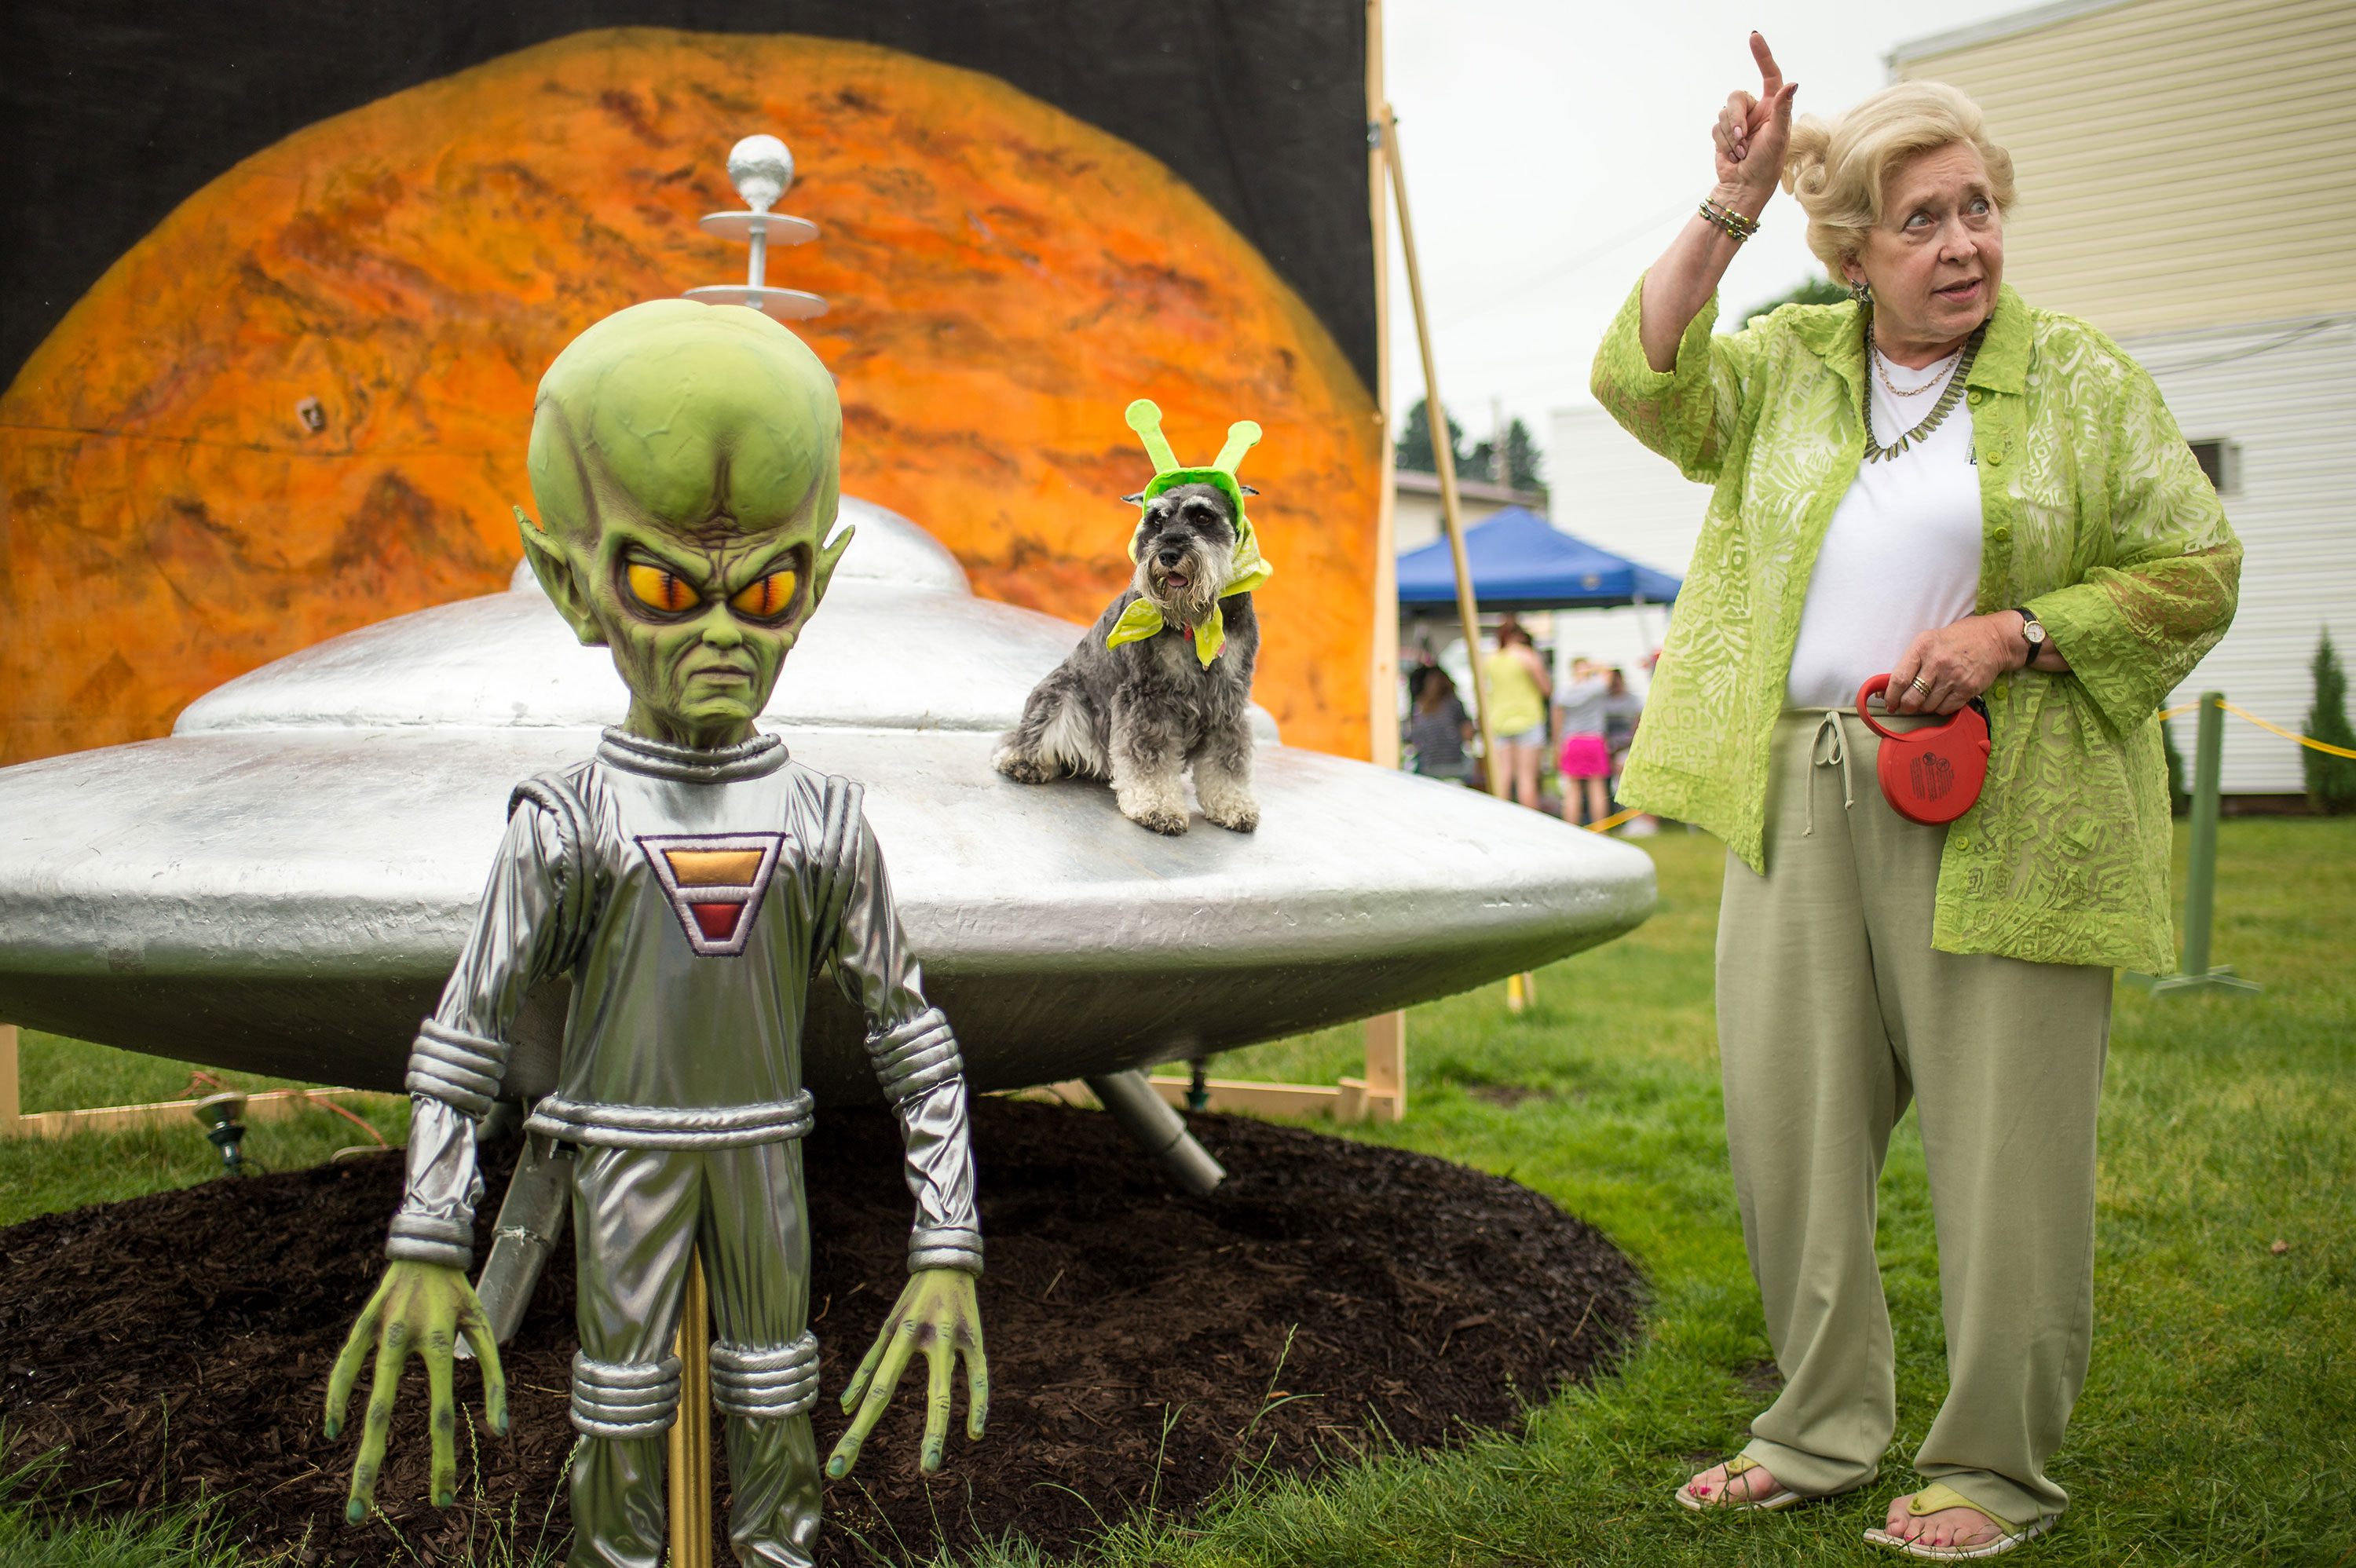 Sue Morris and her dog "Pepper" are seen with a model of a spacecraft and alien used for photos during the Mars New Year's celebration Saturday, June 20, 2015, in Mars, Pennsylvania. Credit: NASA/Bill Ingalls